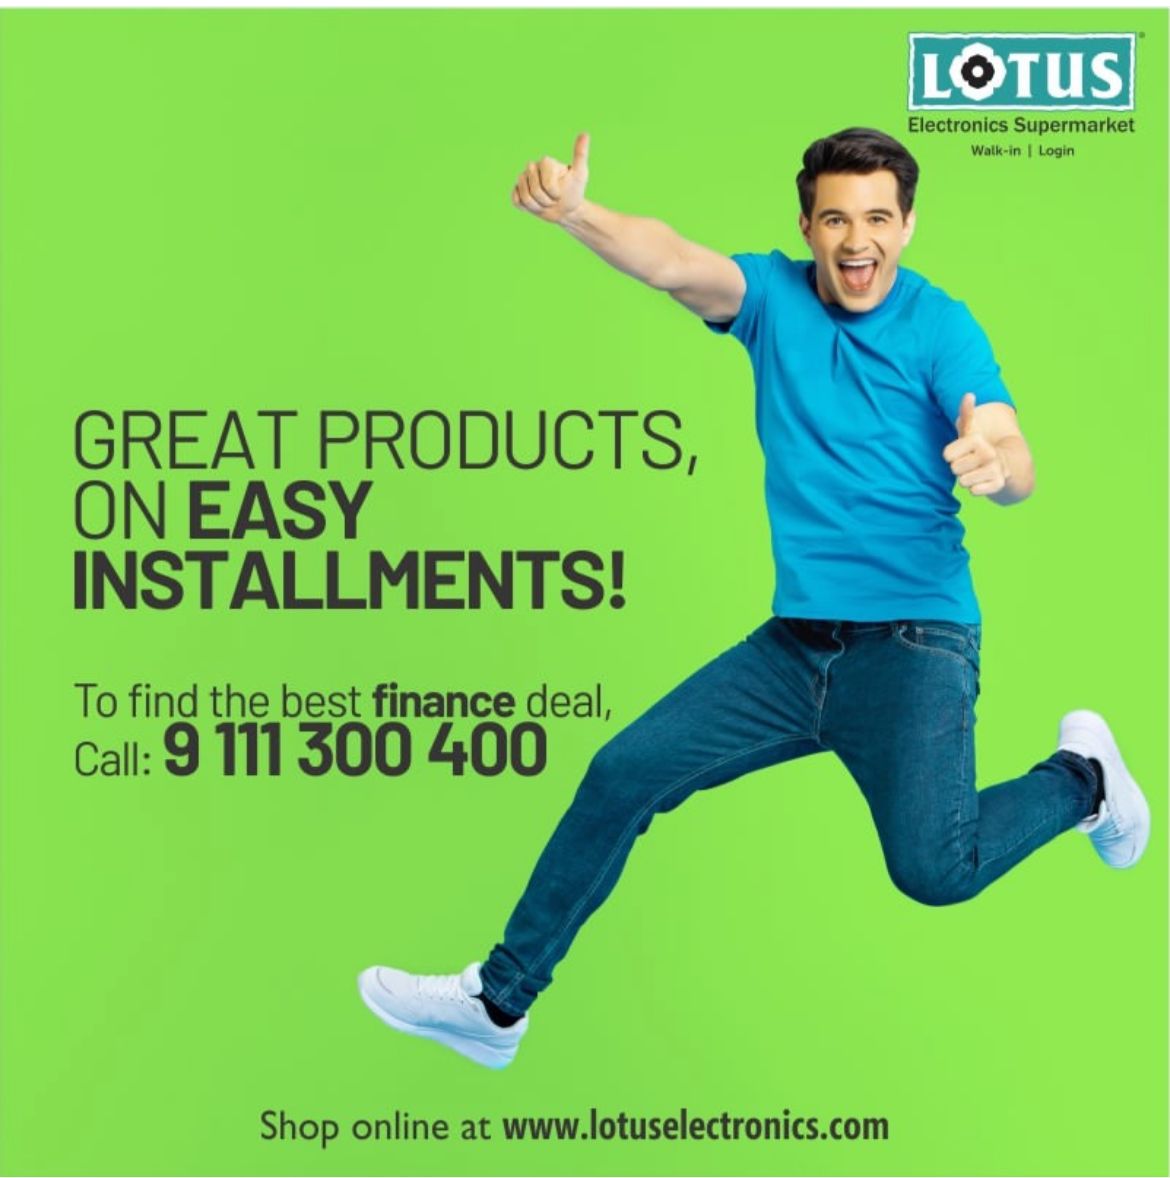 Lotus Electronics employed to maintain a competitive edge in the highly dynamic consumer electronics market